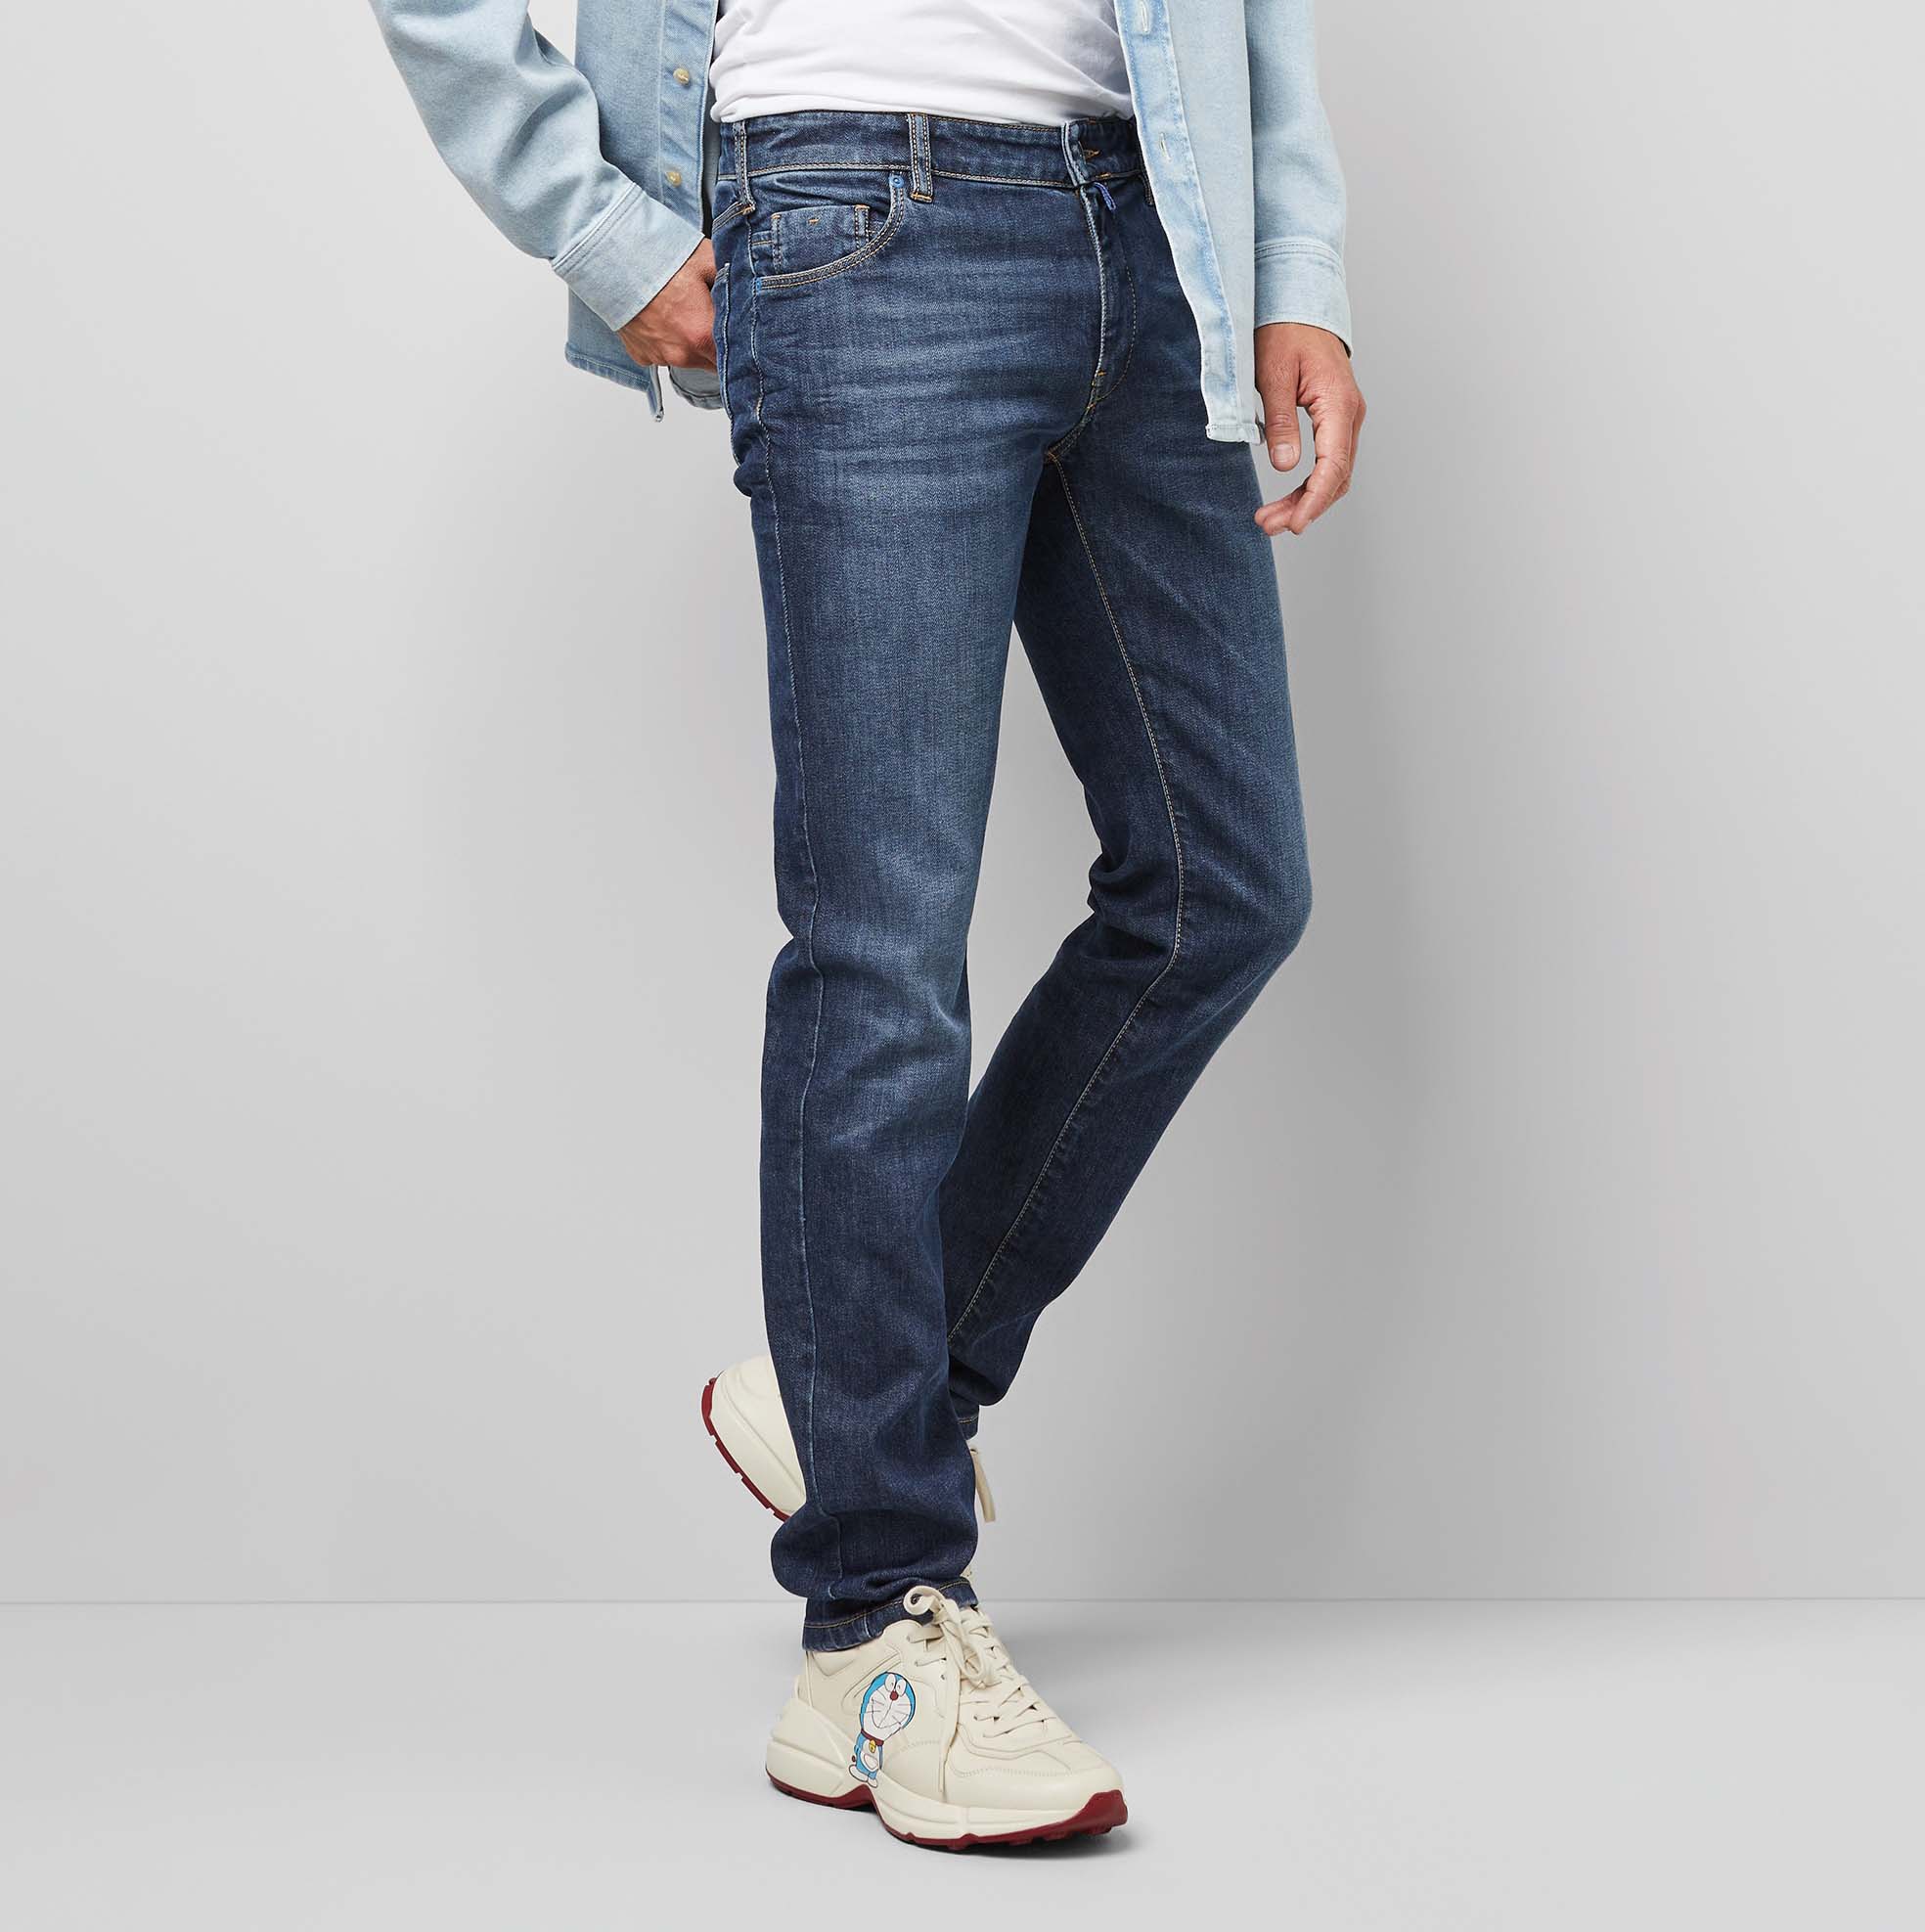 Men's Jeans|Slim,Tapered,Straight & Bootcut Jeans